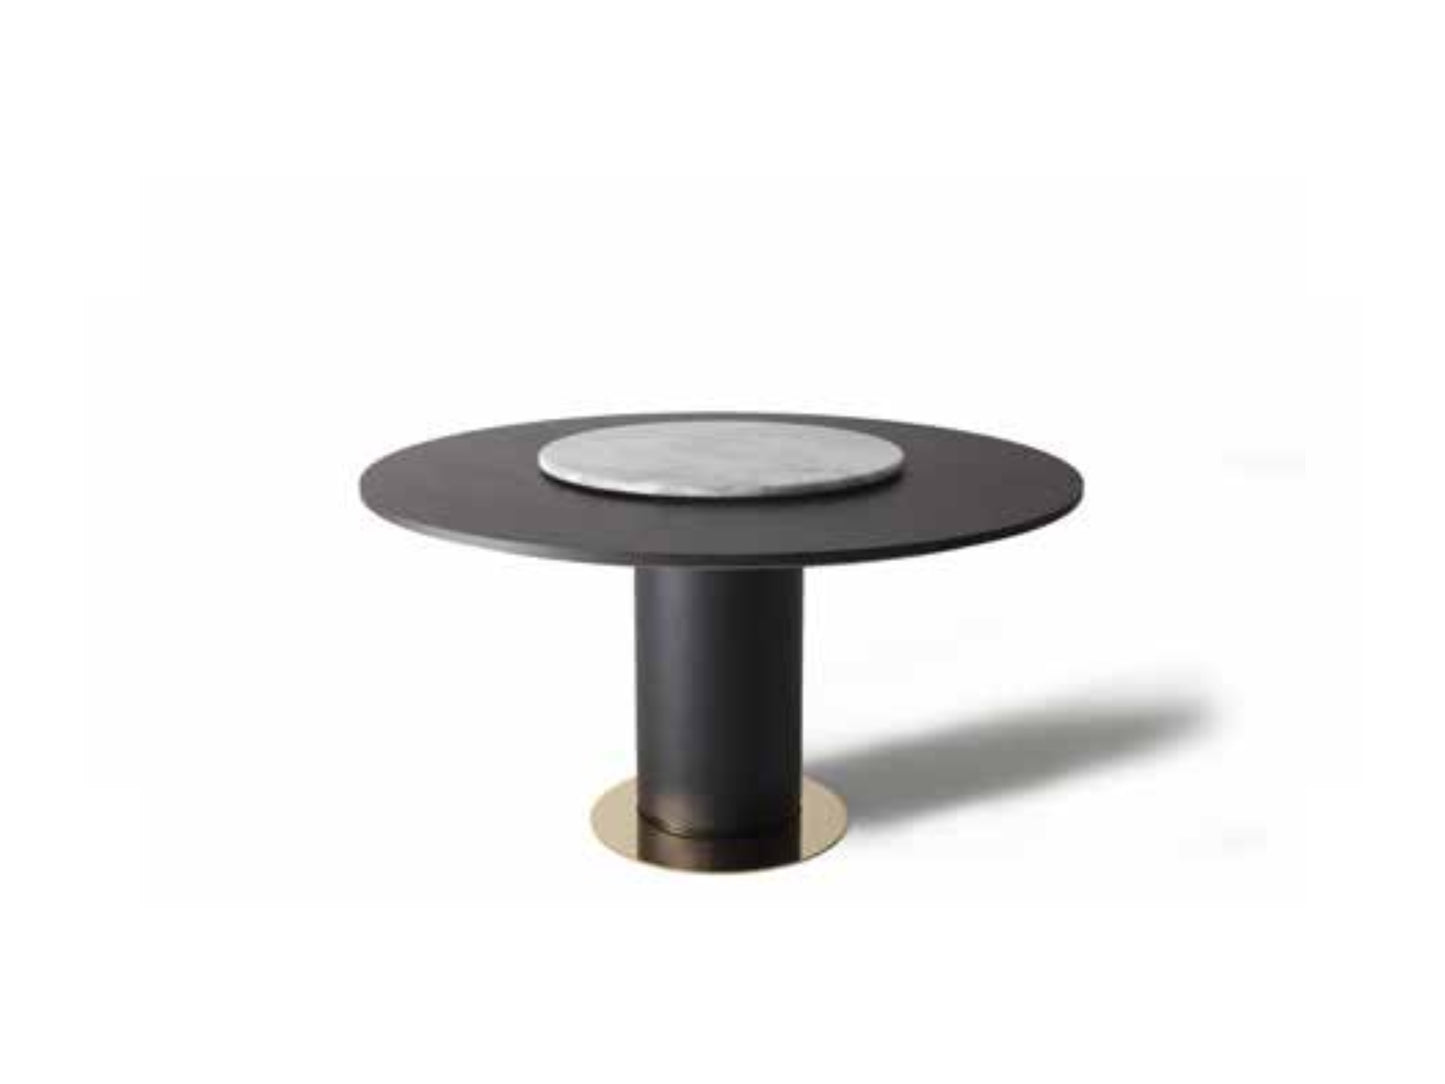 4200 CIRCLE | Dining Table with Lazy Susan by Vibieffe $6,980.00